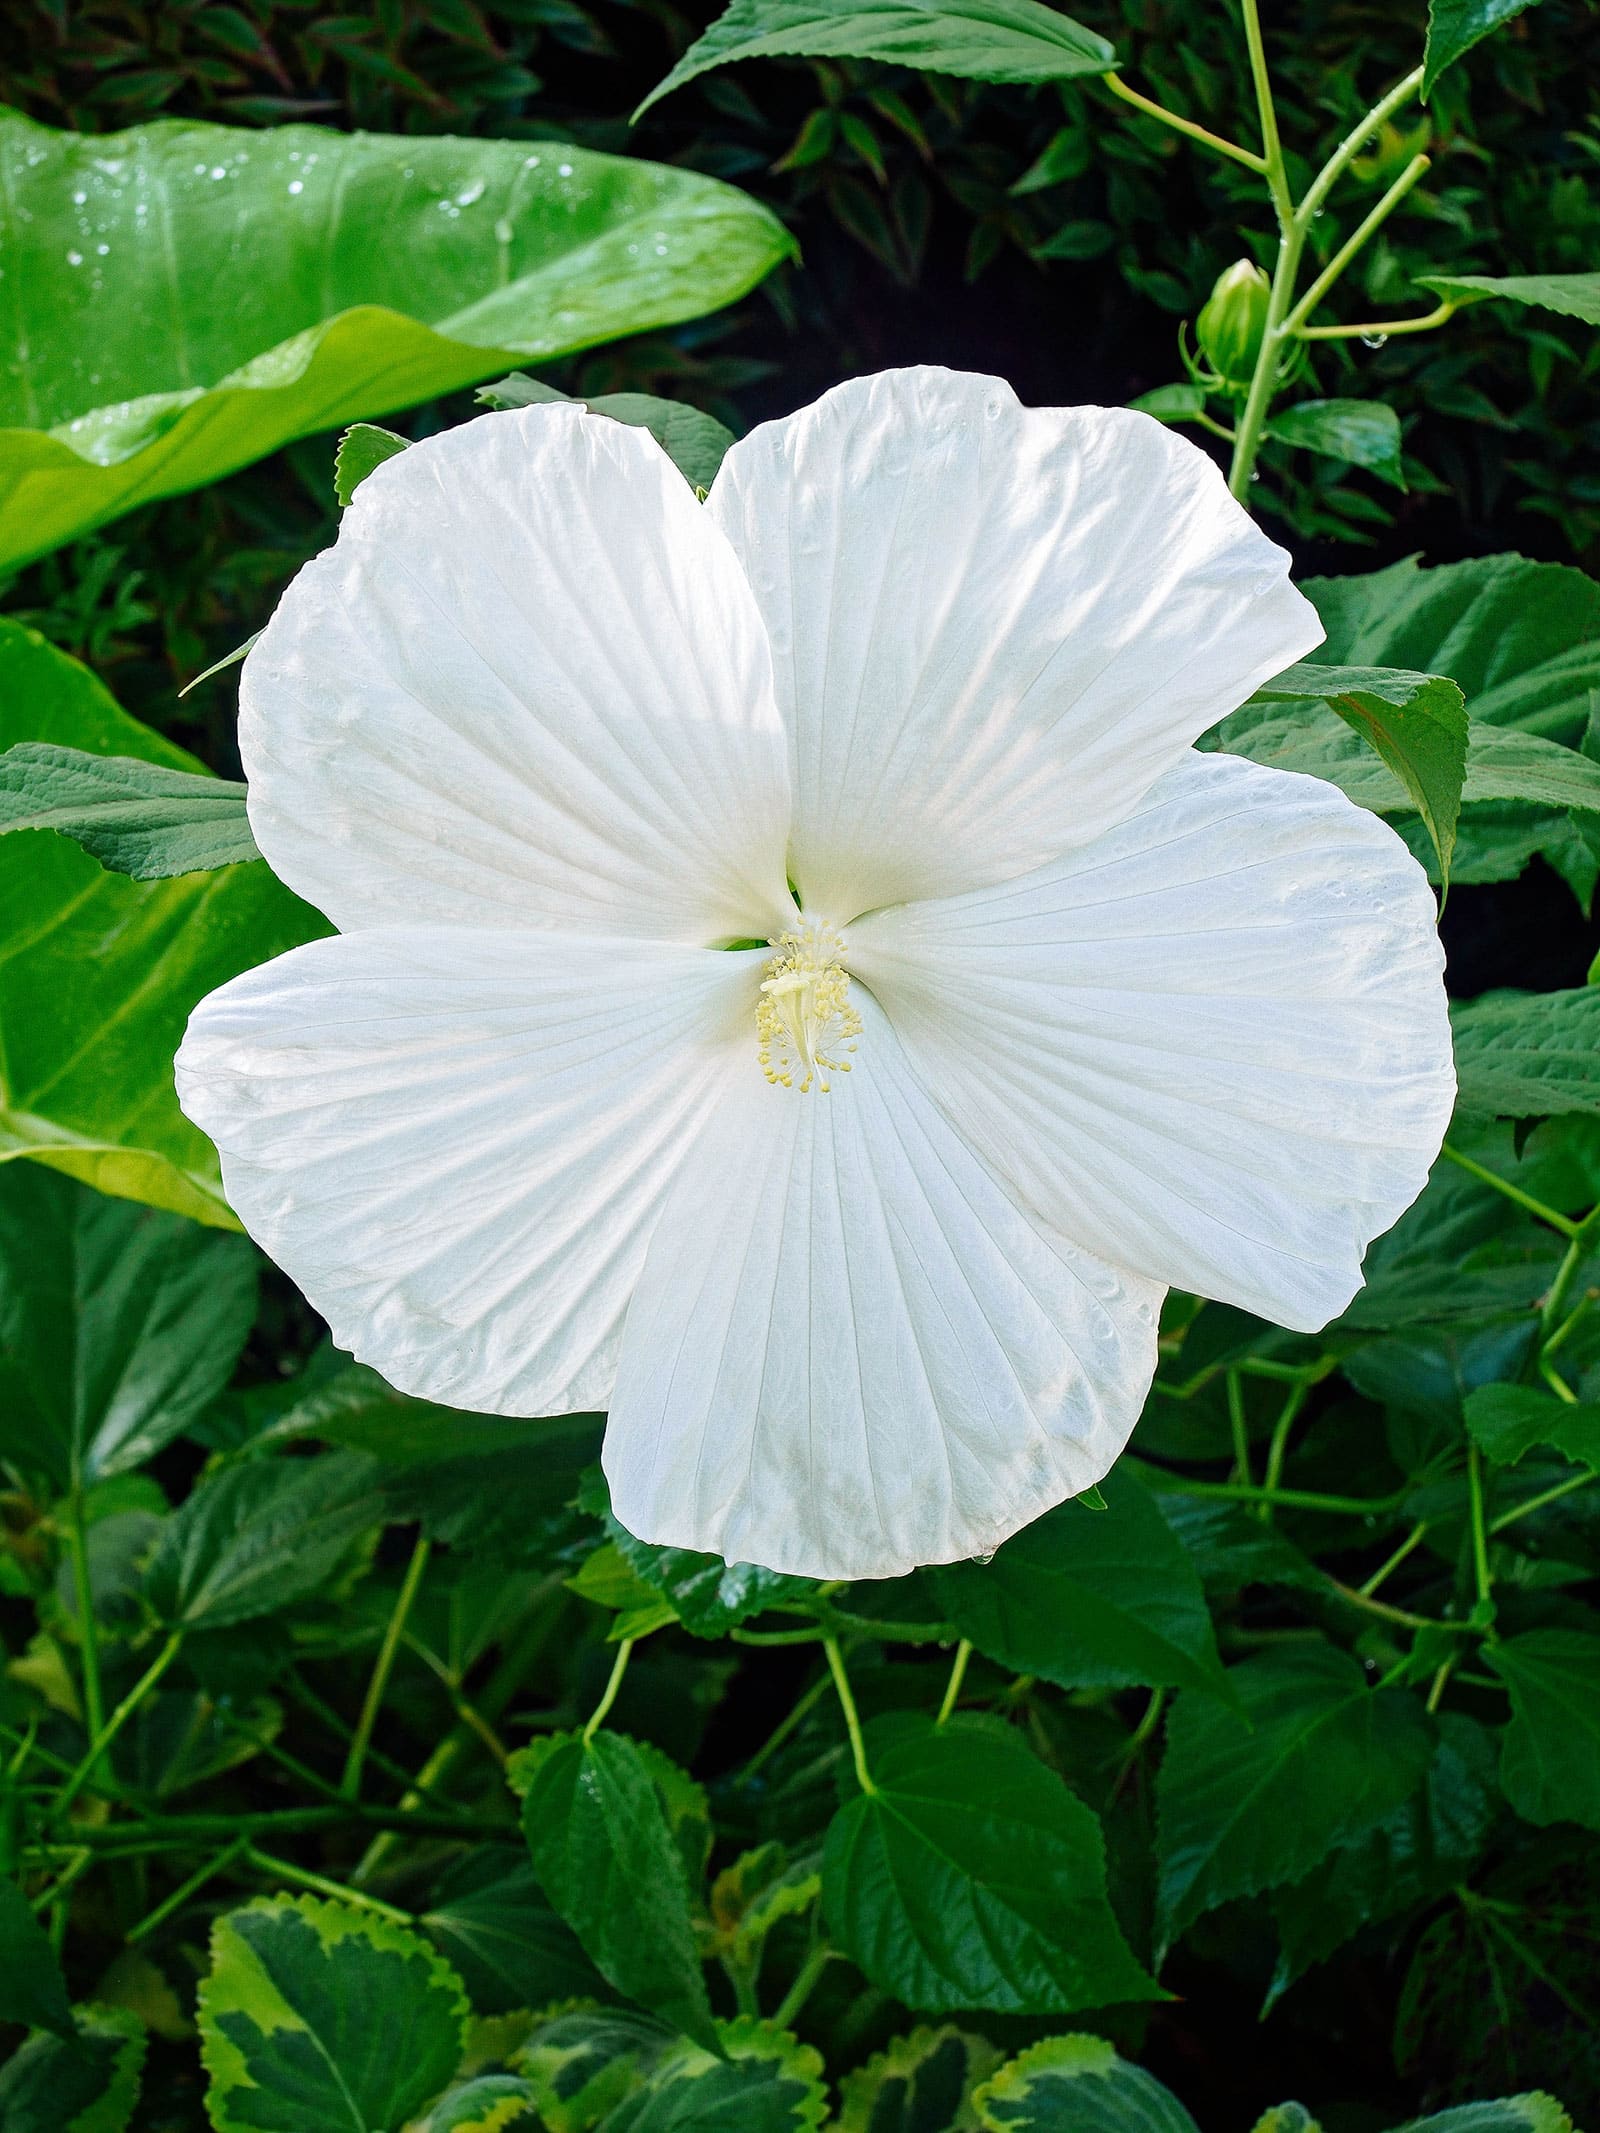 Dinnerplate-sized white hardy hibiscus flower